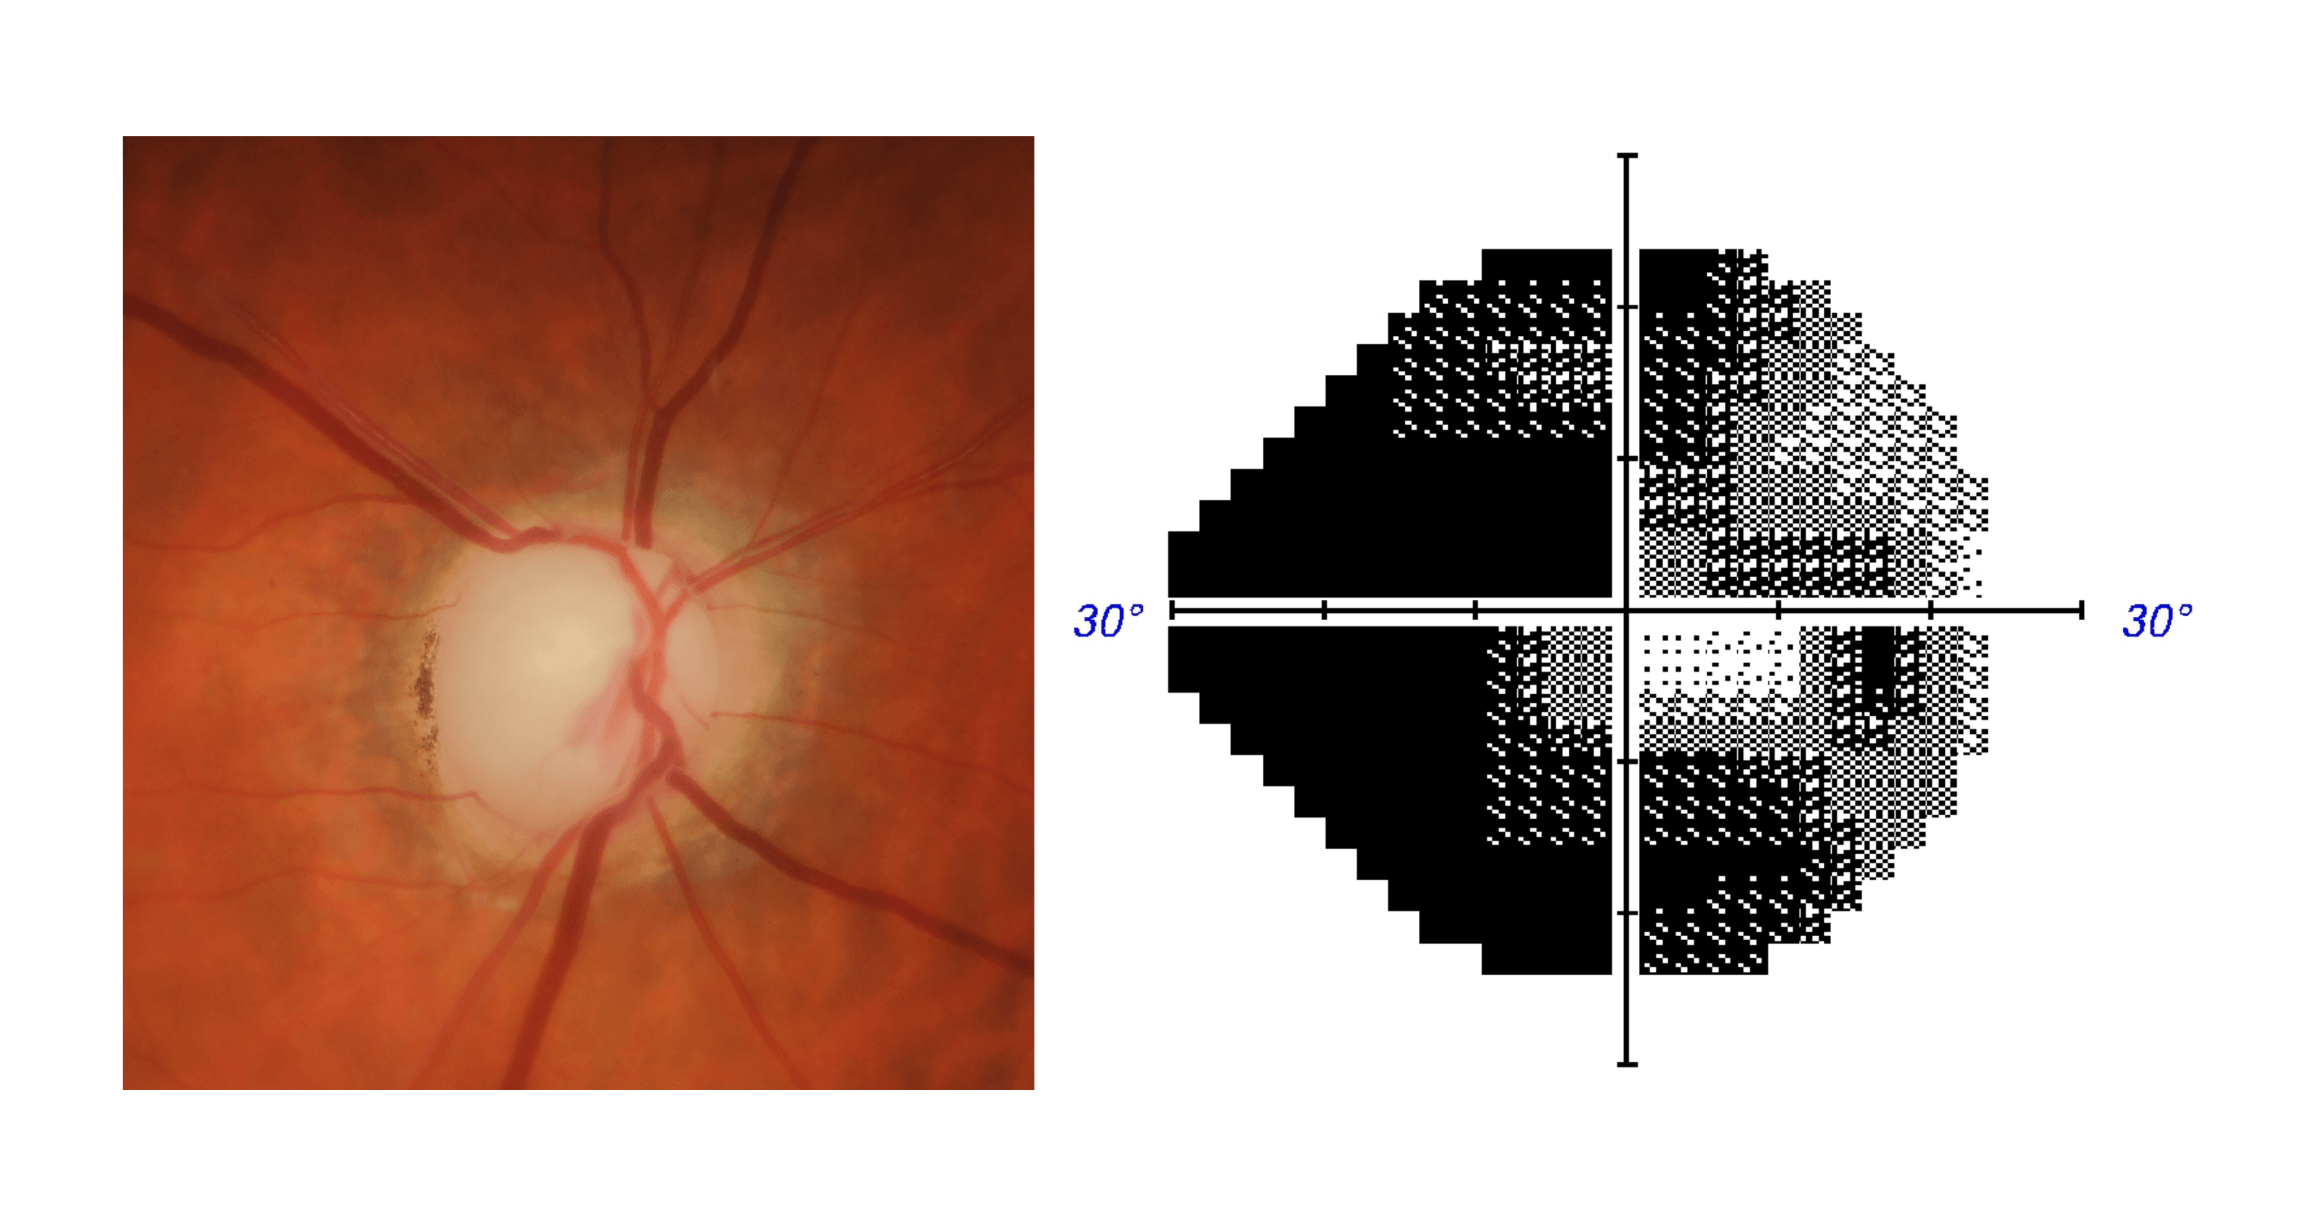 Optic nerve photo and visual field results for an eye with advanced glaucoma